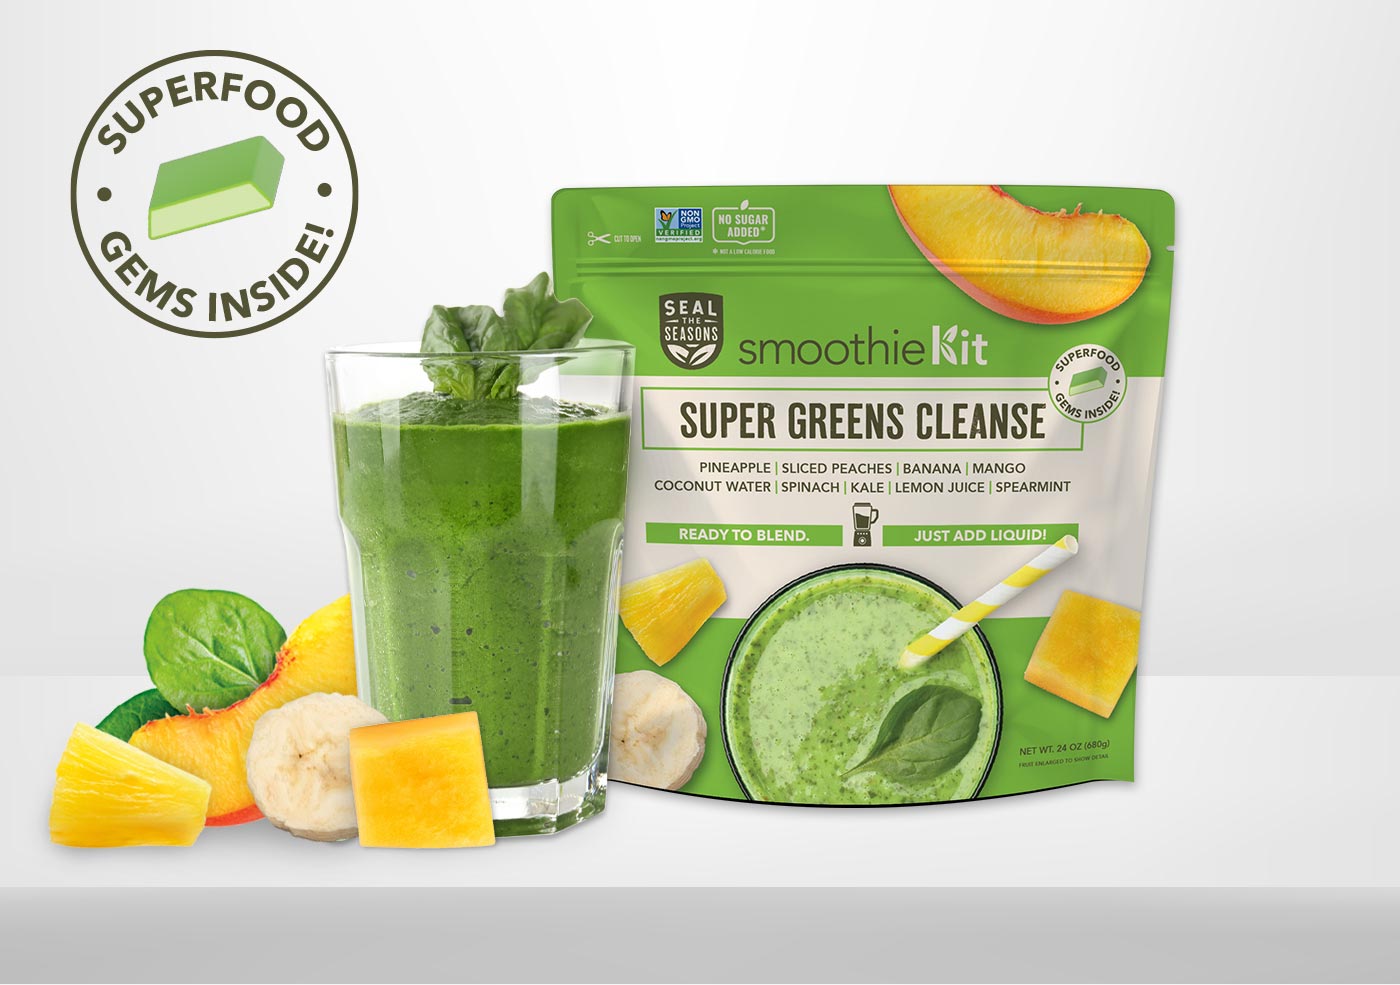 Super Greens Cleanse Smoothie Kit – sealtheseasons